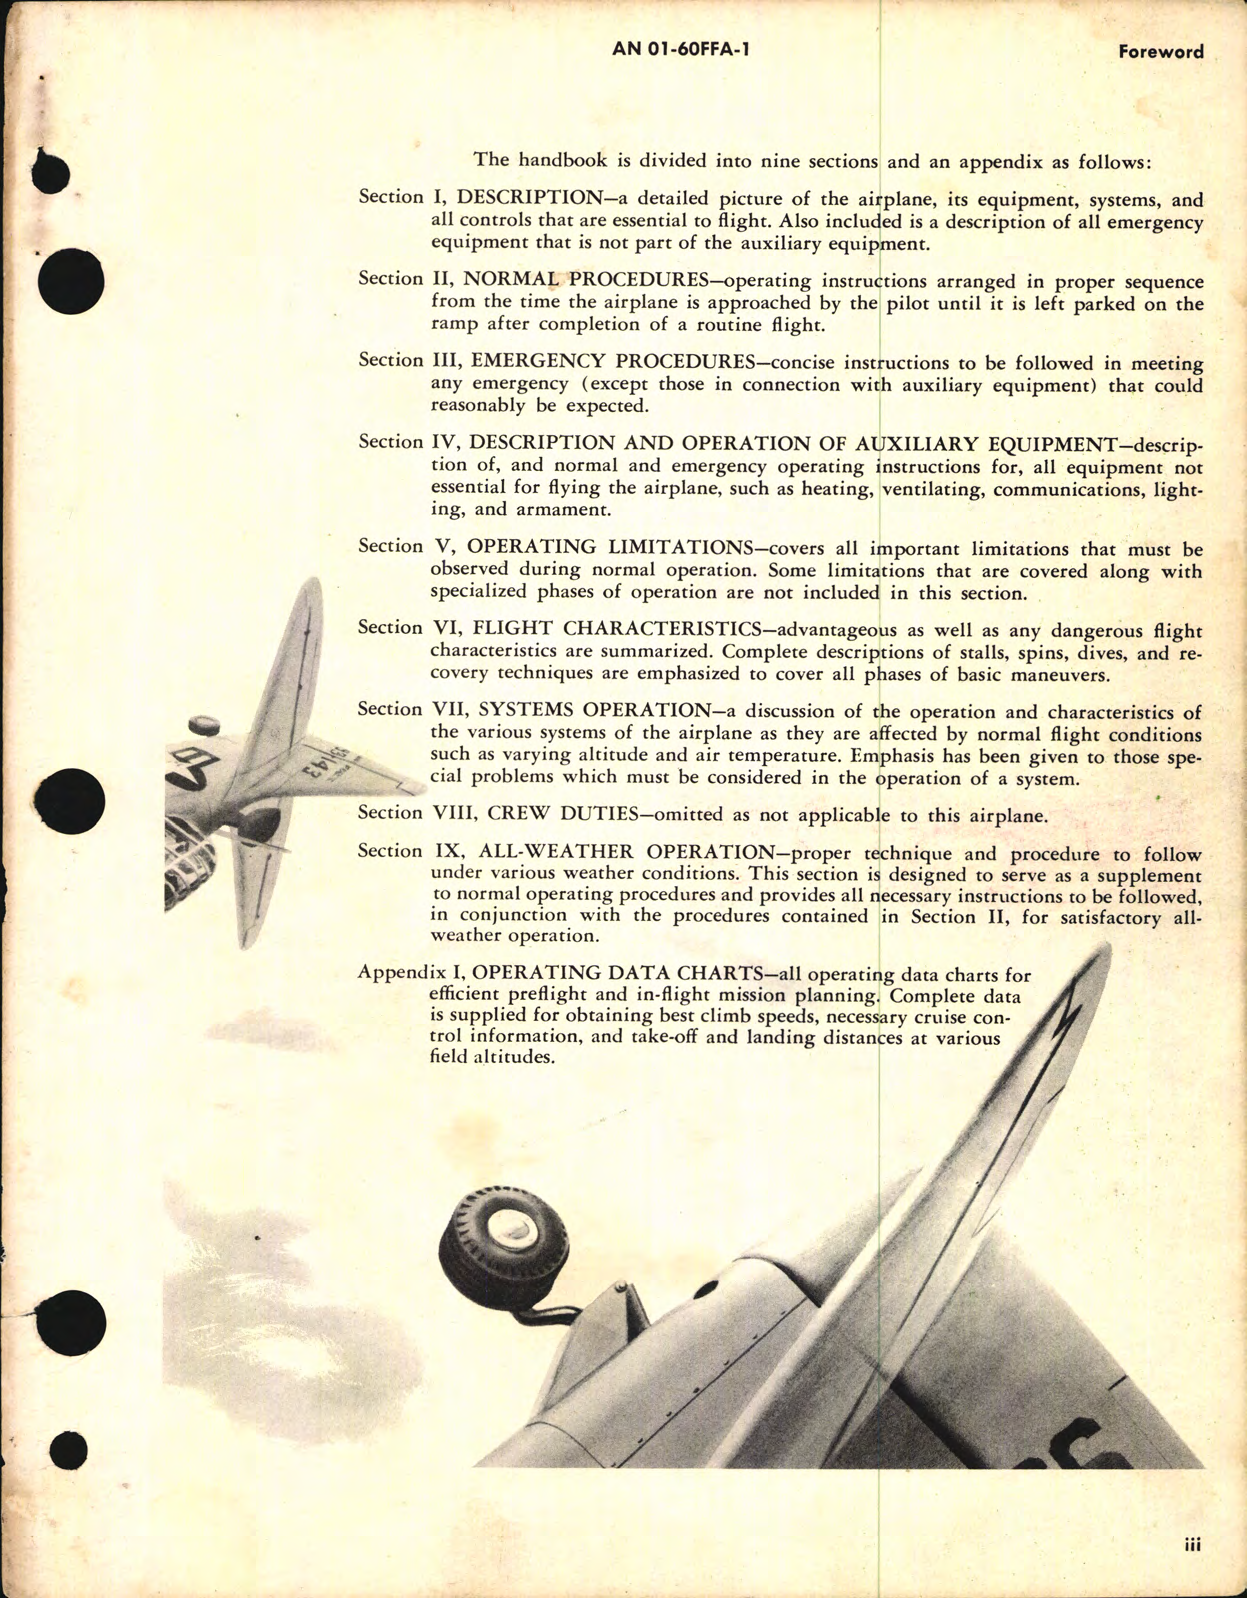 Sample page 5 from AirCorps Library document: Flight Handbook for T-6G